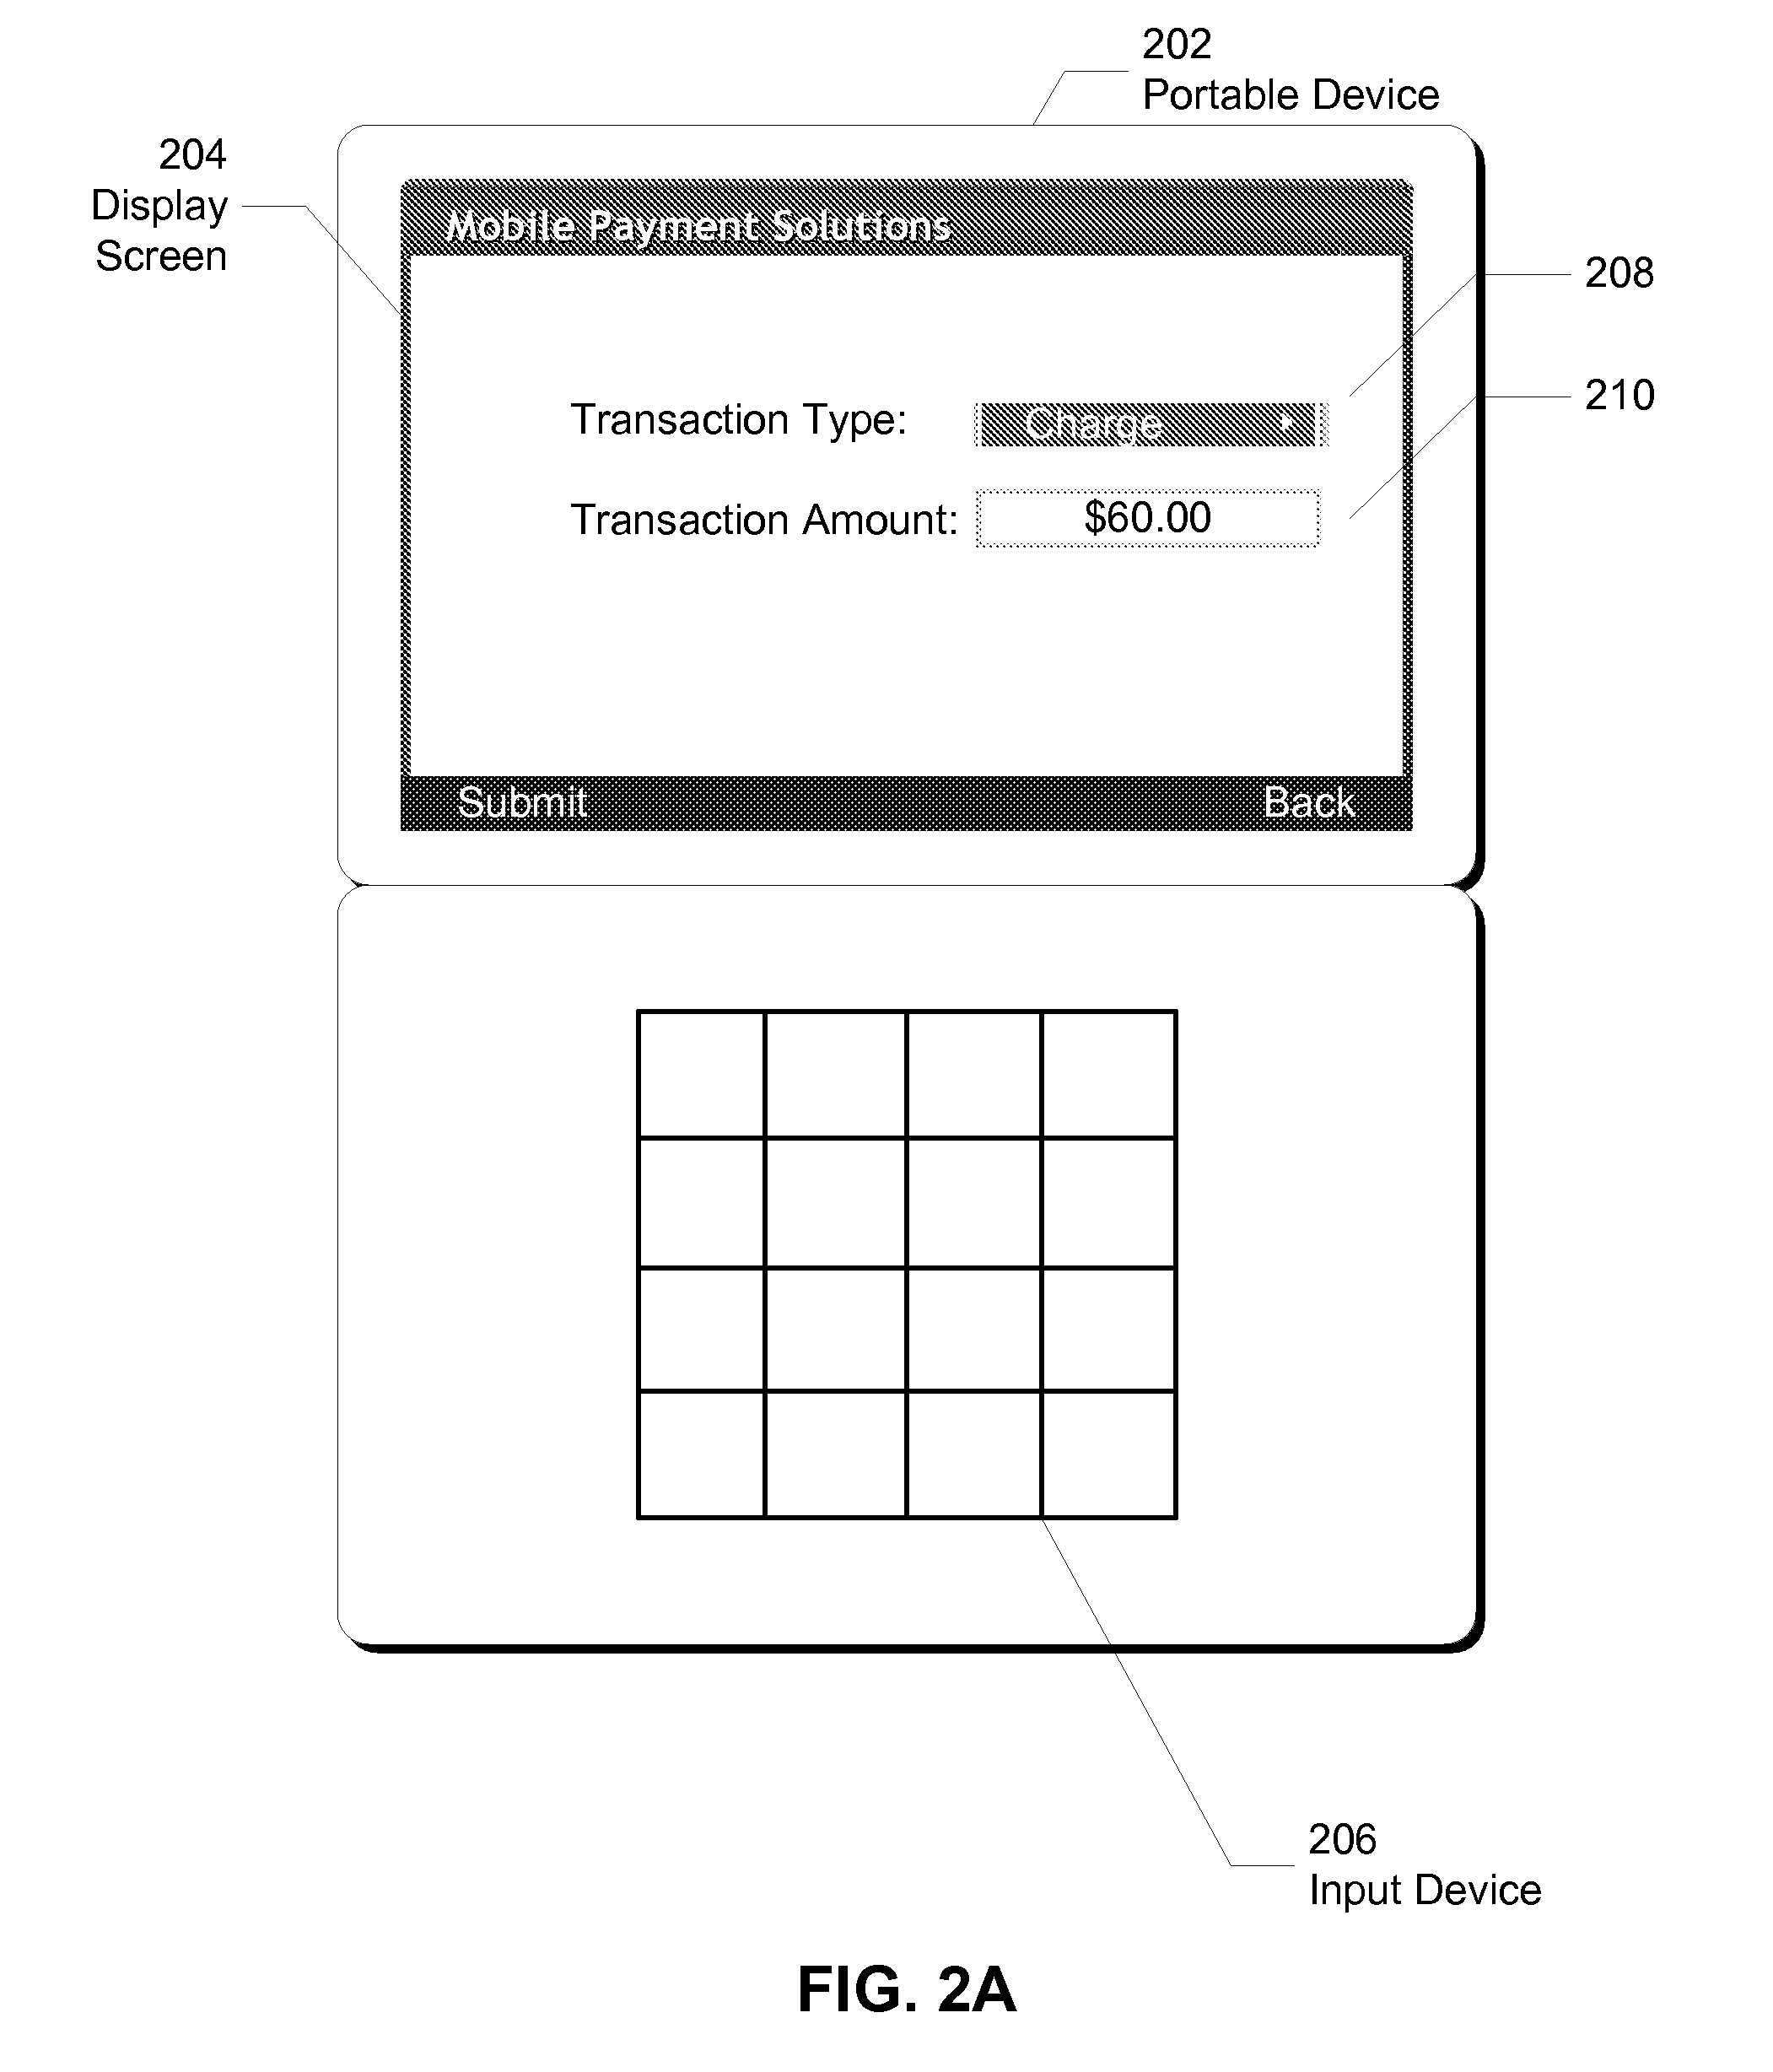 Method and system for performing a card-present transaction using image capture on a portable device